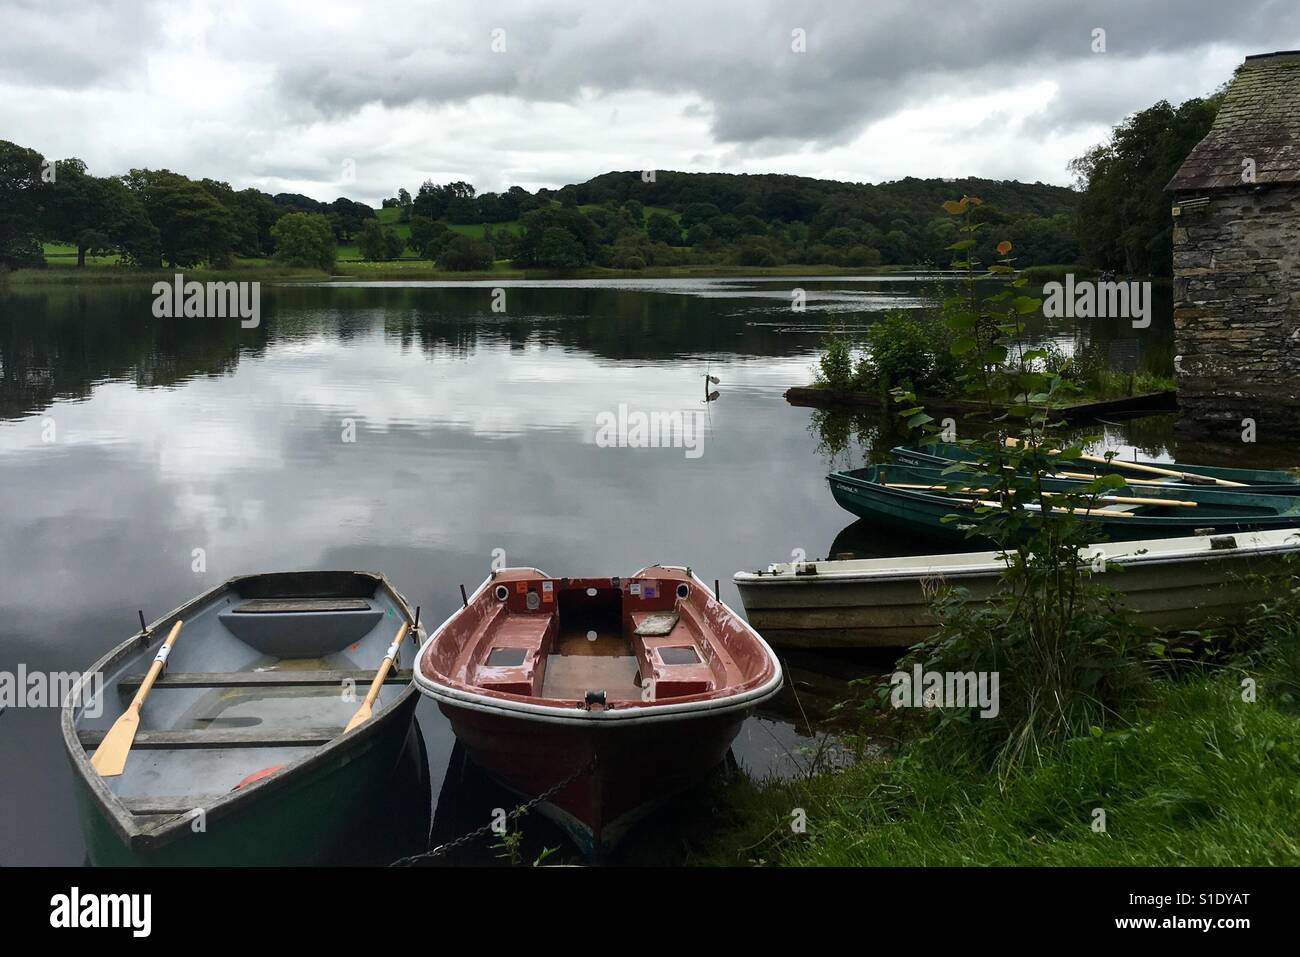 Boats on Tranquil Esthwaite Water Stock Photo